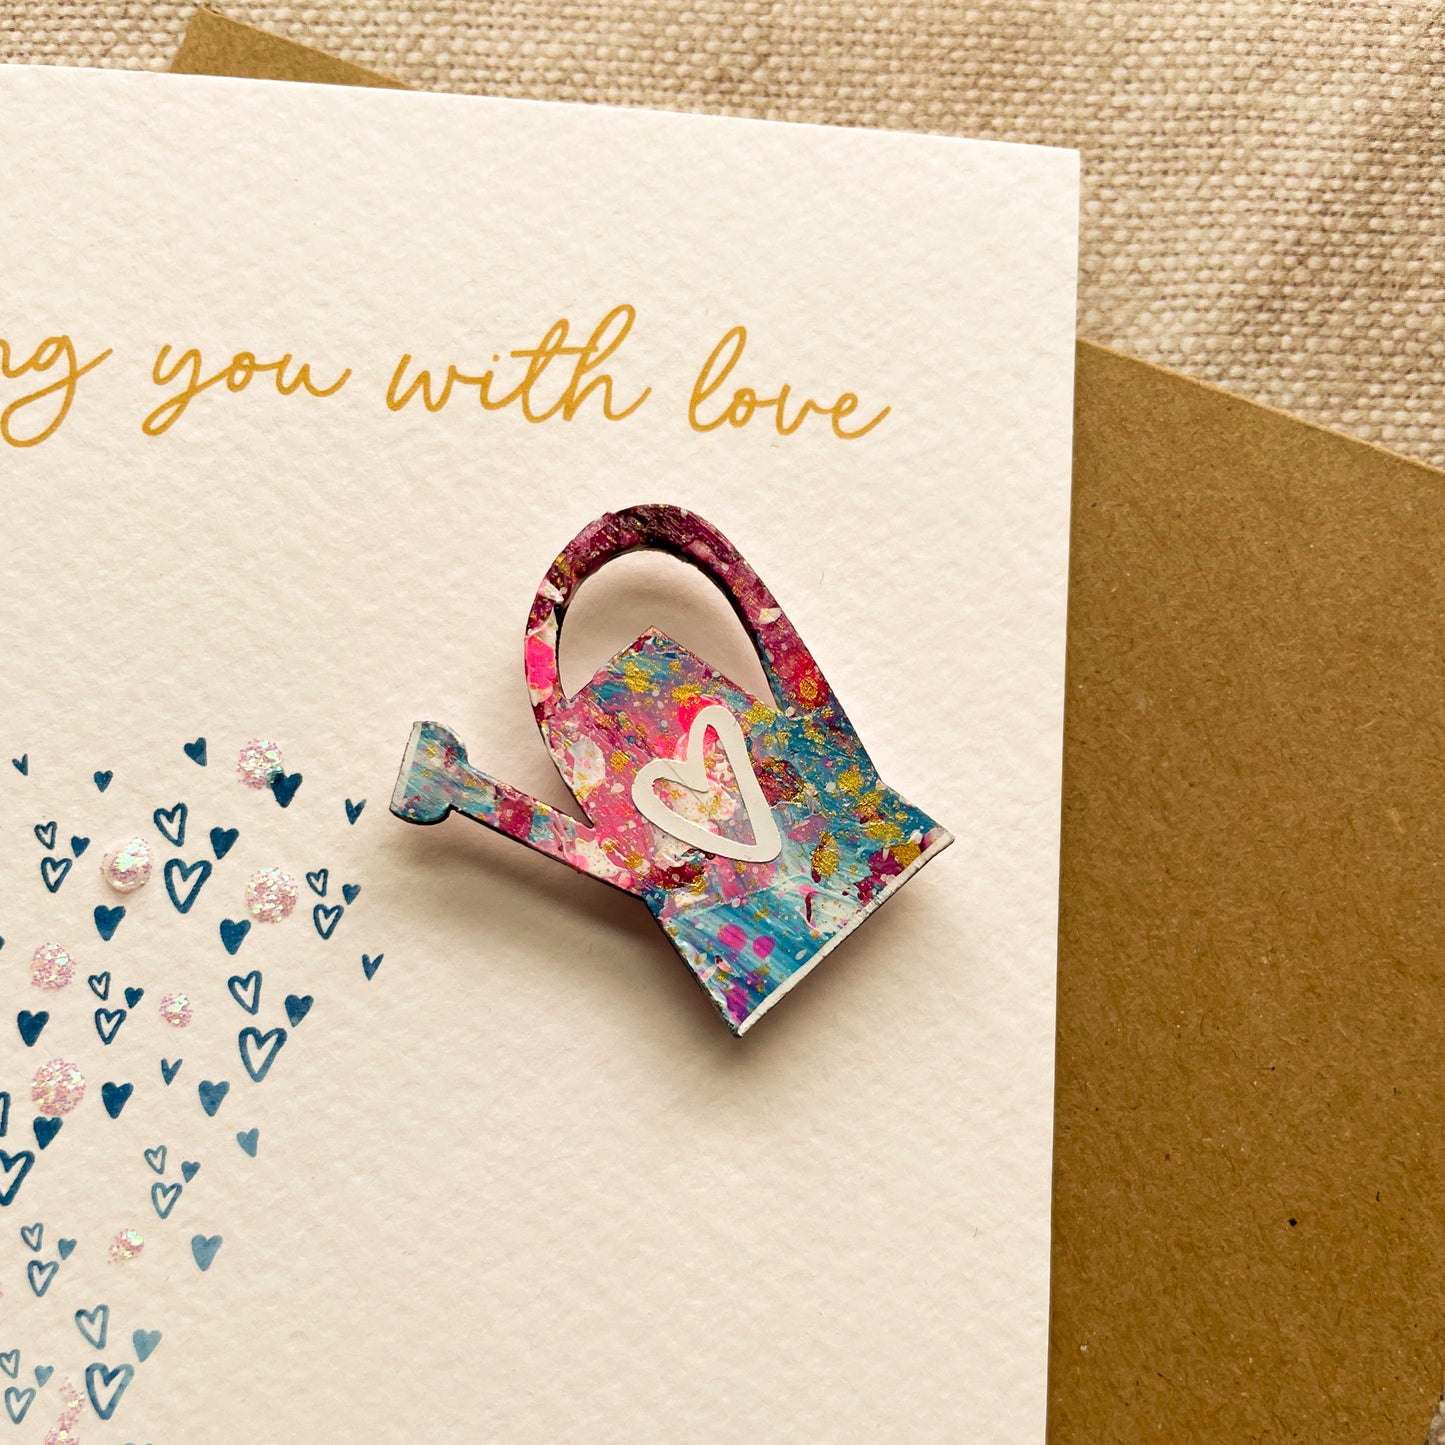 Magnet Keepsake & Mother's Day Card - Showering you with Love